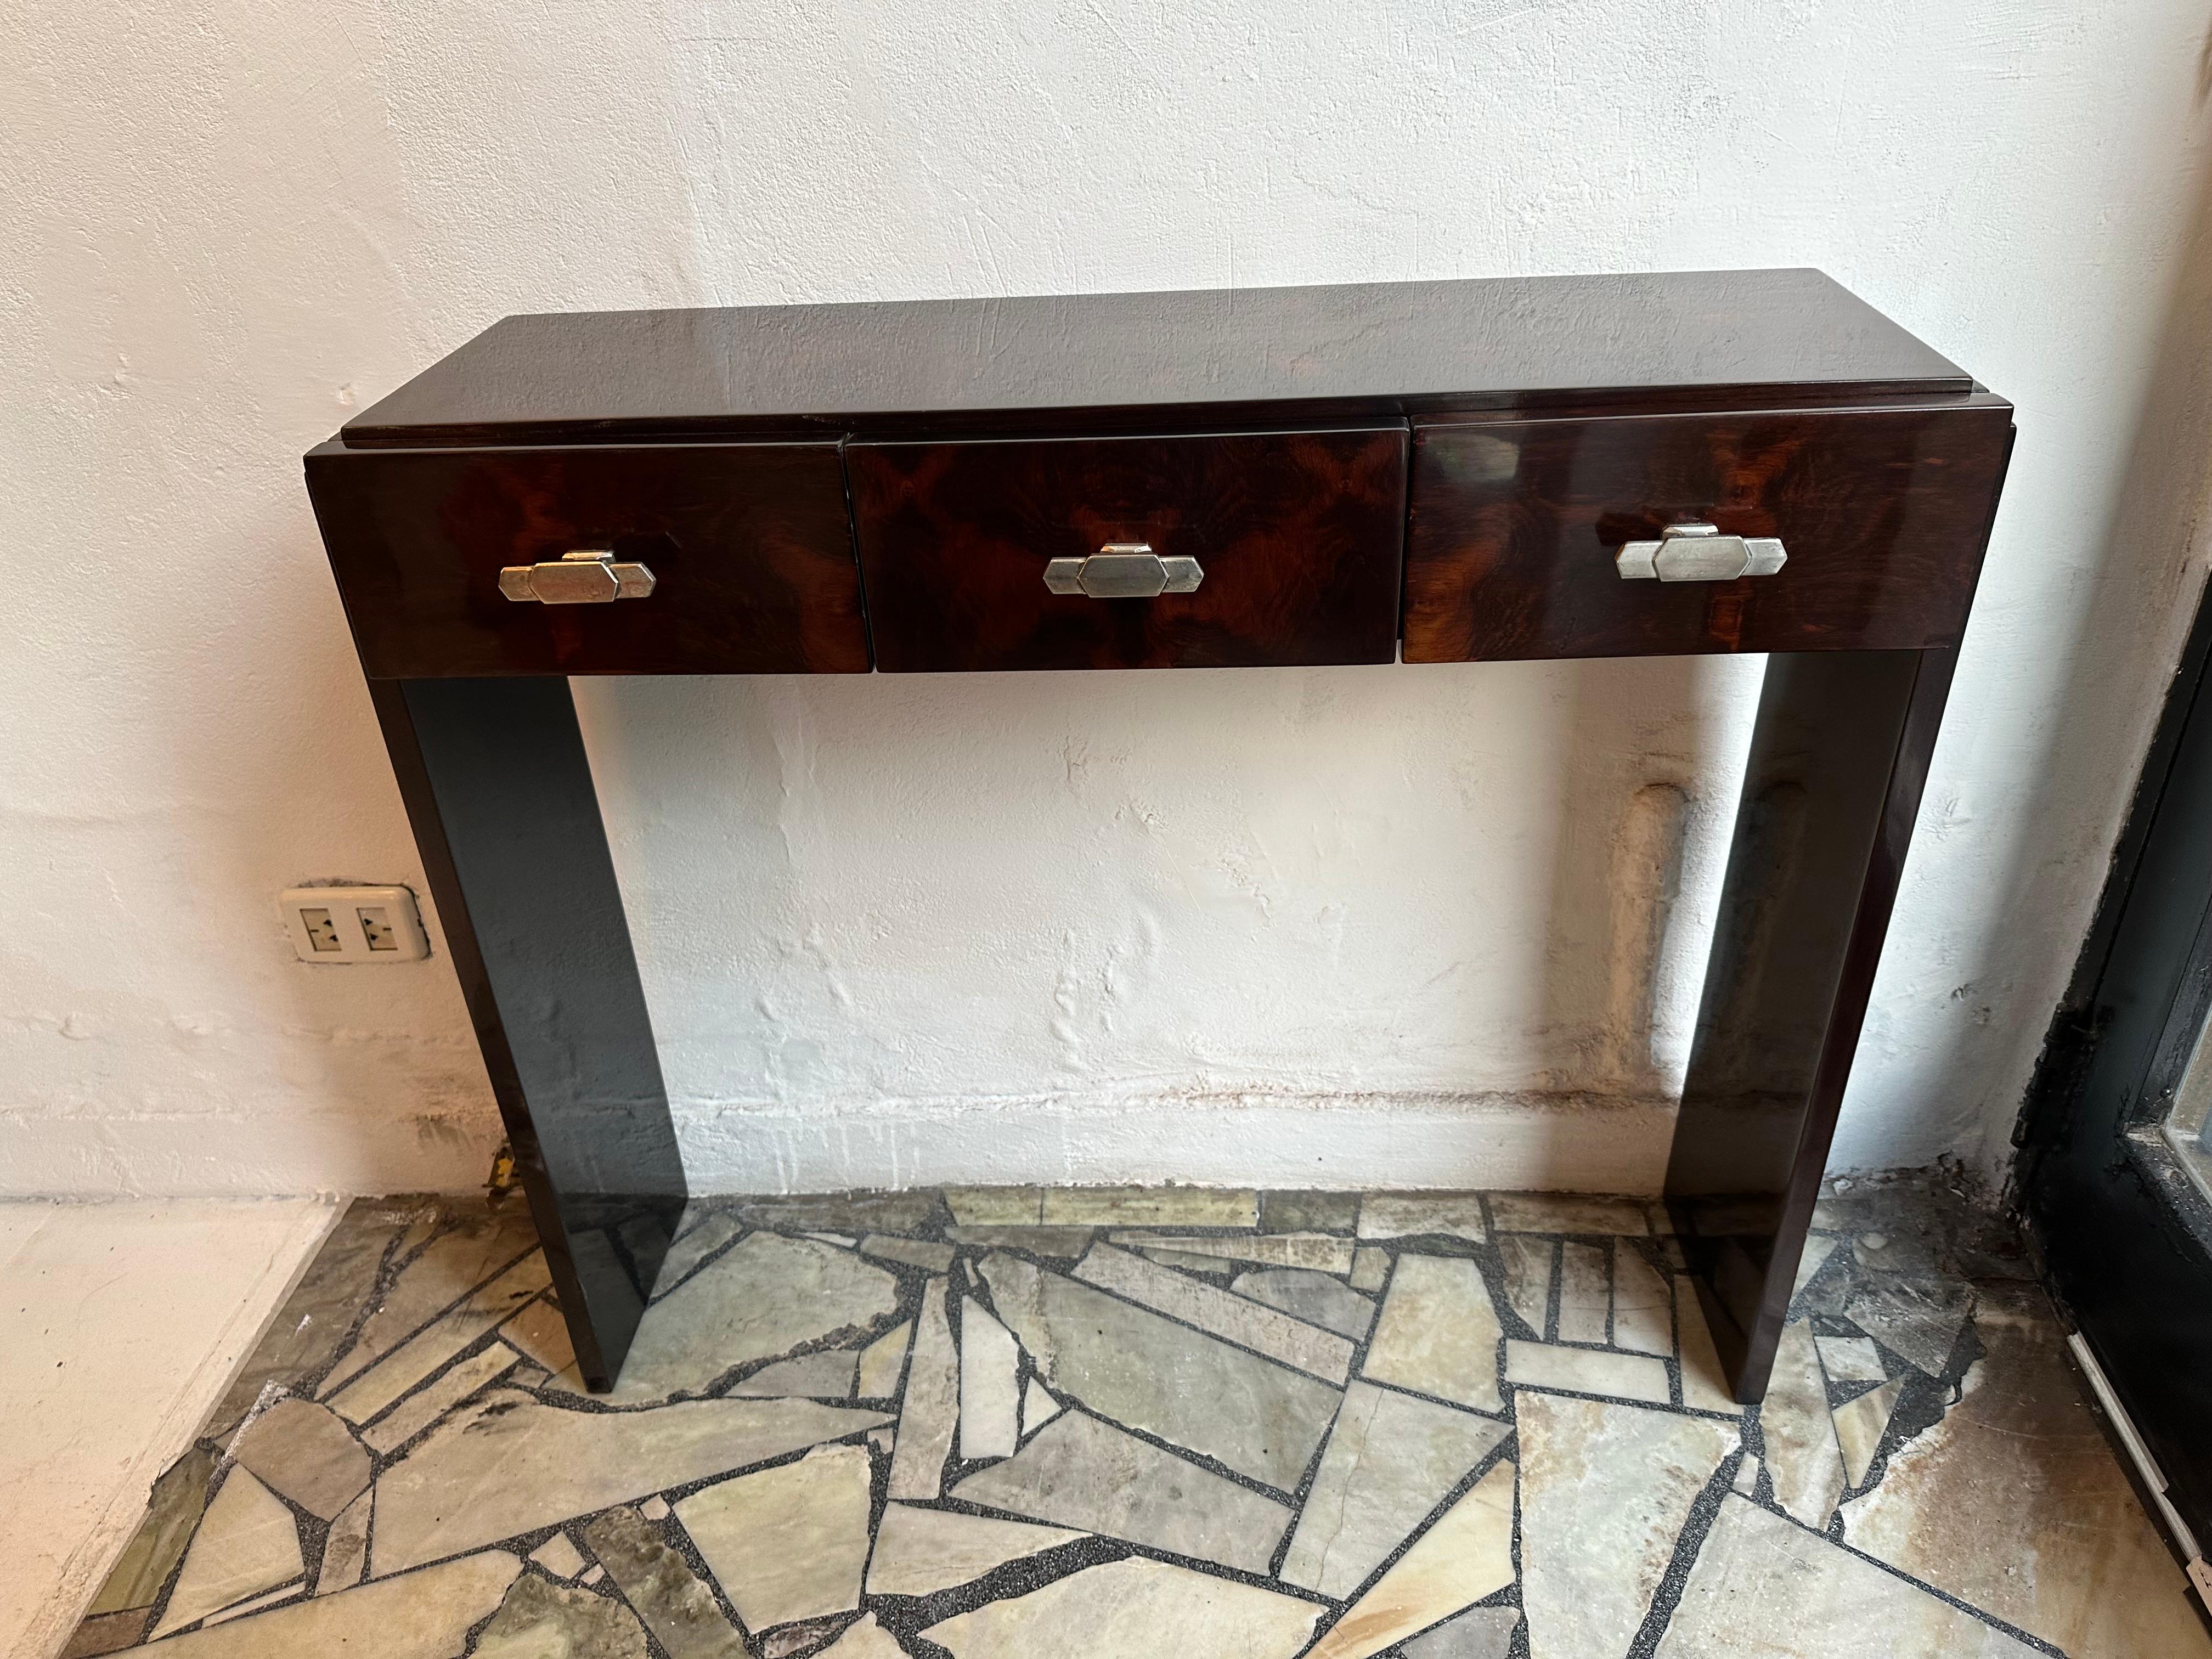 Pair of consoles
Material: wood and bronze
Style: Art Deco
Country: France
If you want to live in the golden years, this is the tables that your project needs.
We have specialized in the sale of Art Deco and Art Nouveau and Vintage styles since